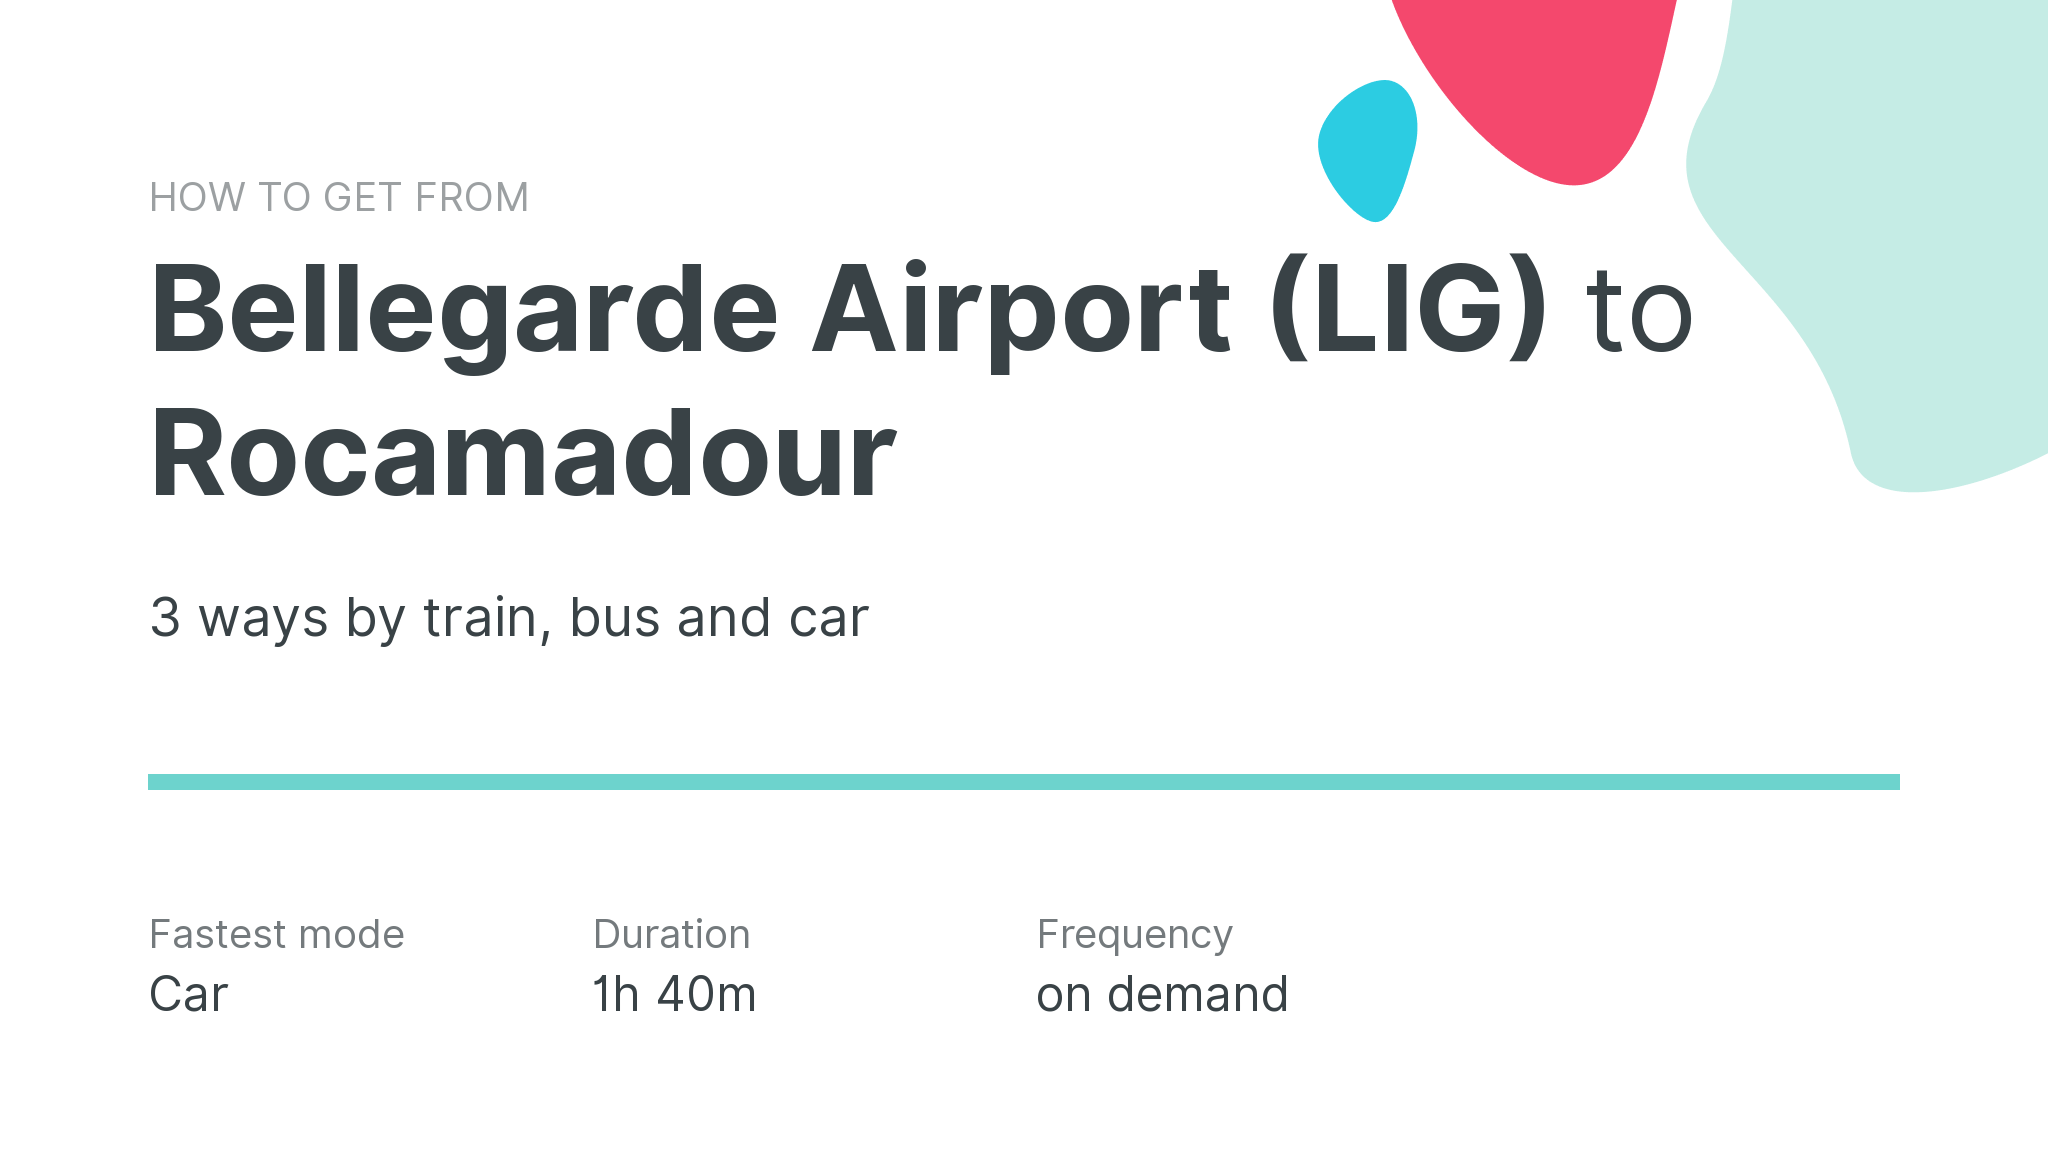 How do I get from Bellegarde Airport (LIG) to Rocamadour